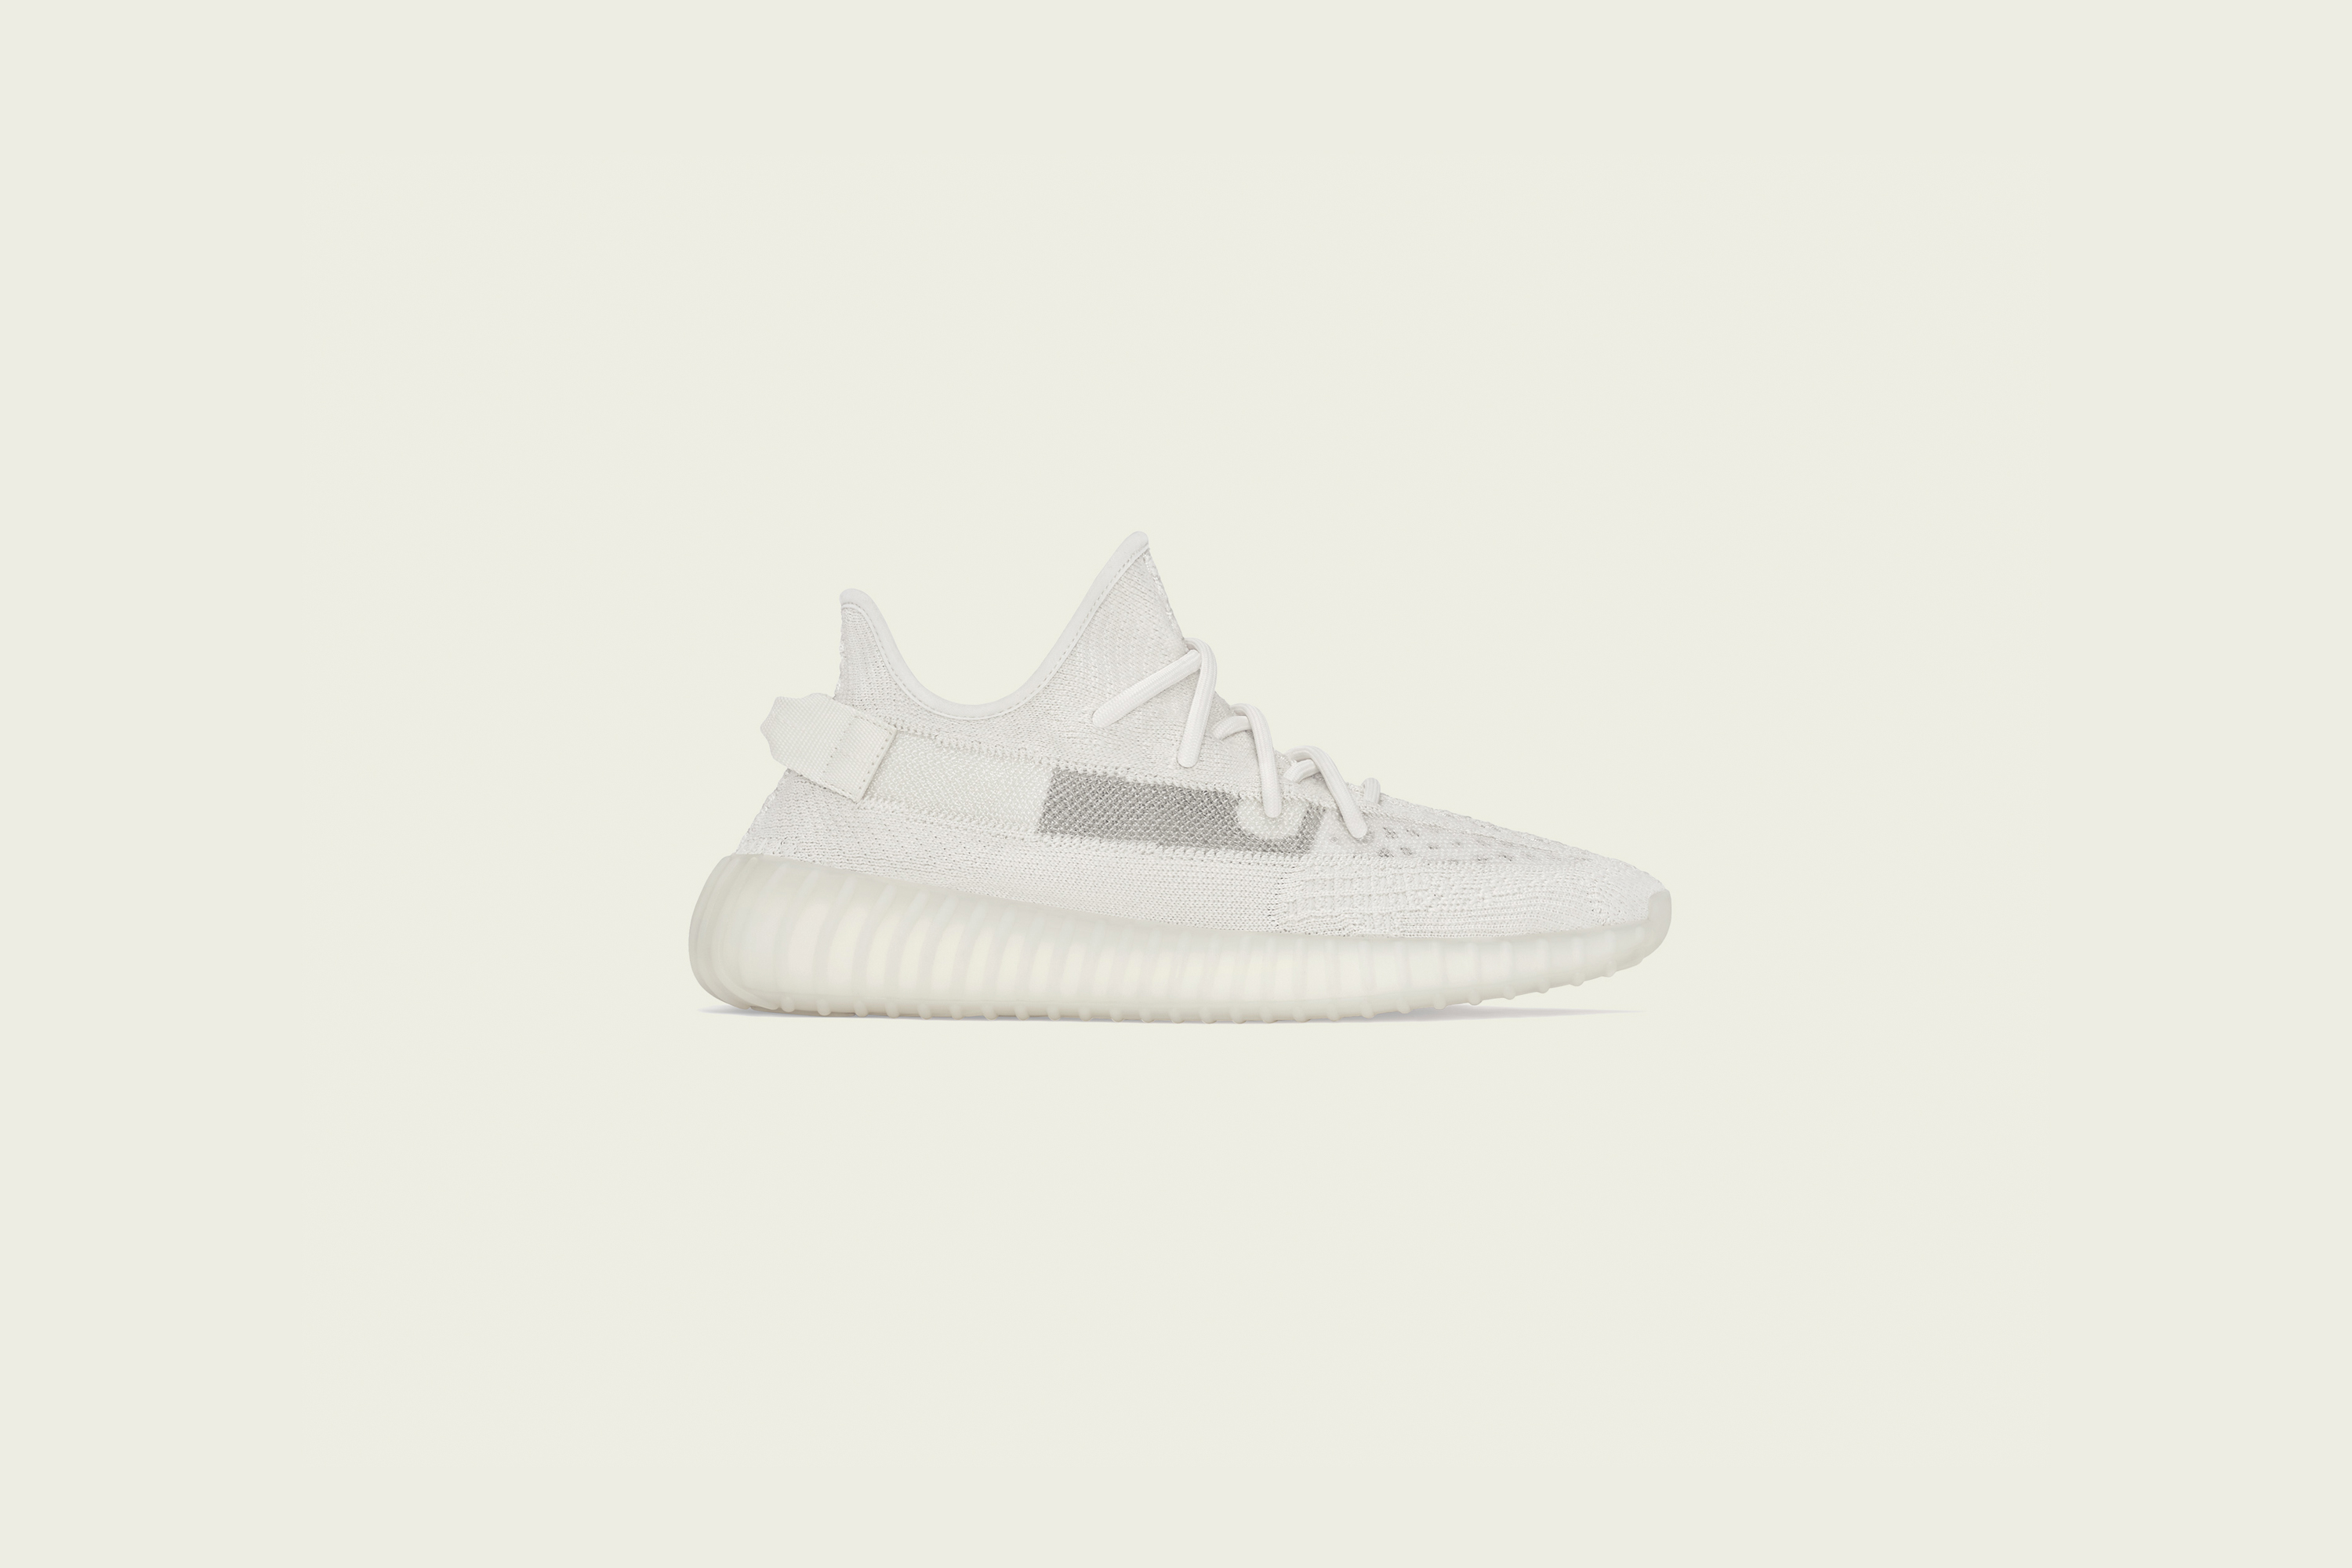 adidas - Yeezy Boost 350v2 - Bone - Up There